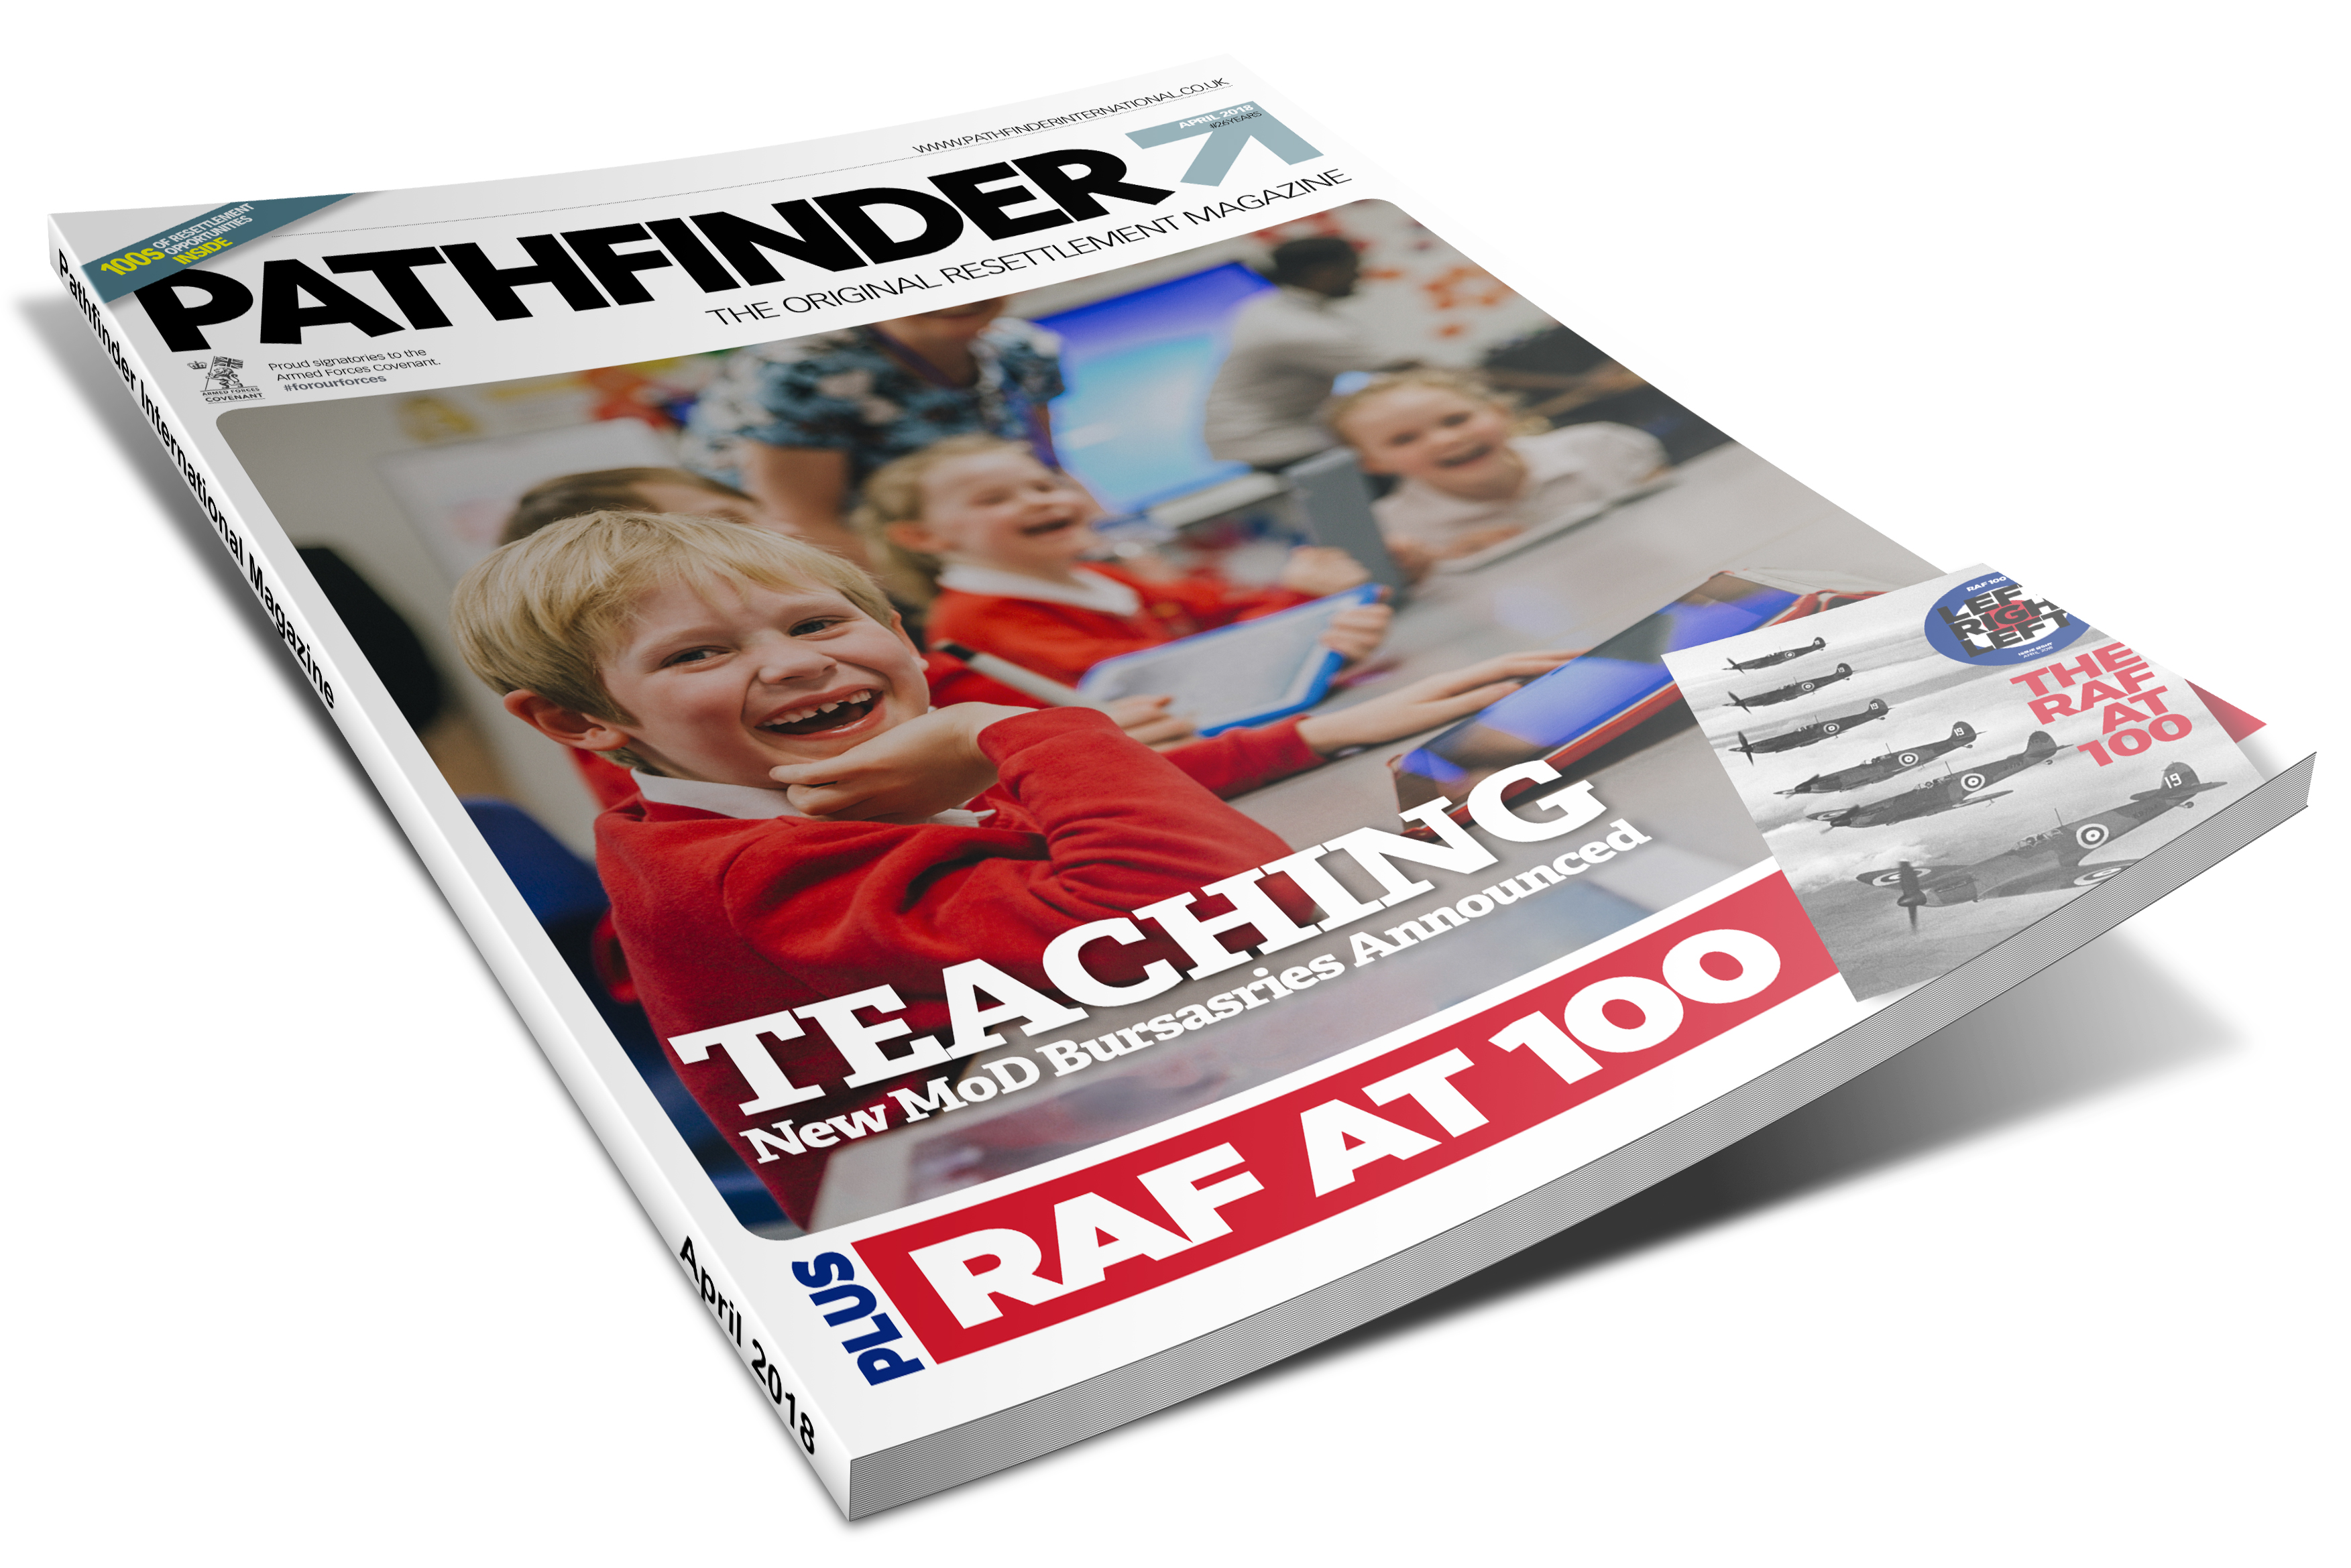 Read The April Issue Of Pathfinder Here